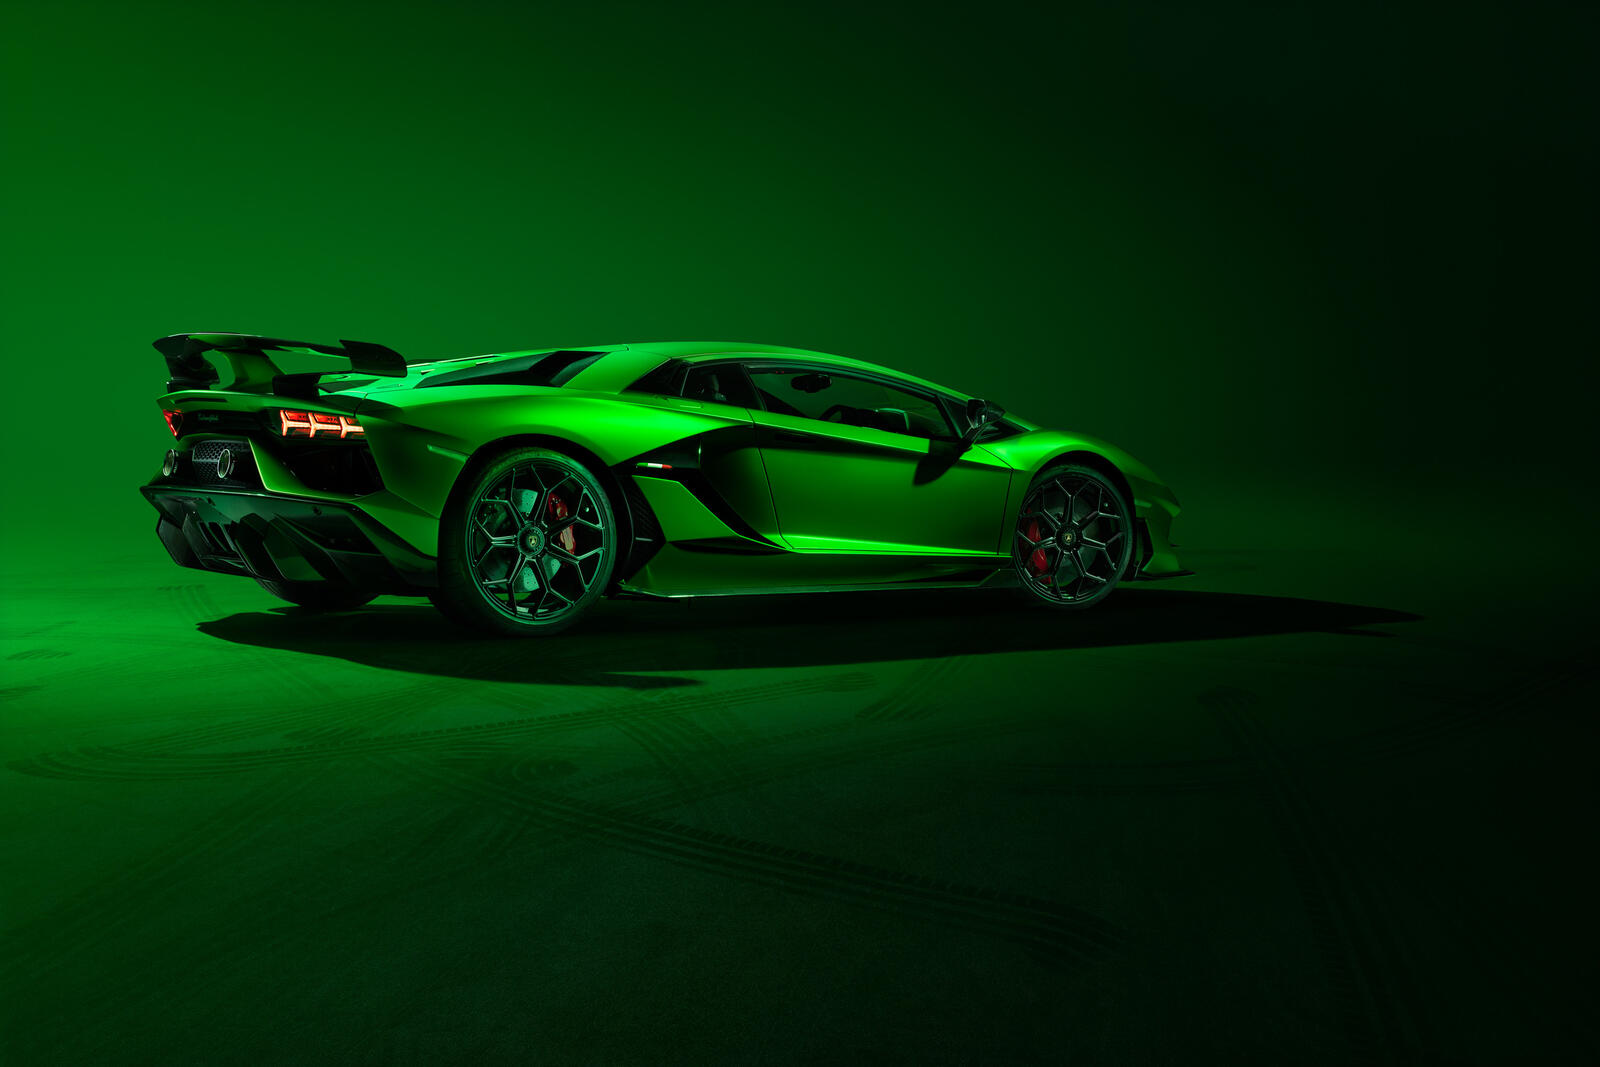 Wallpapers cars Lamborghini Aventador SVJ view from behind on the desktop